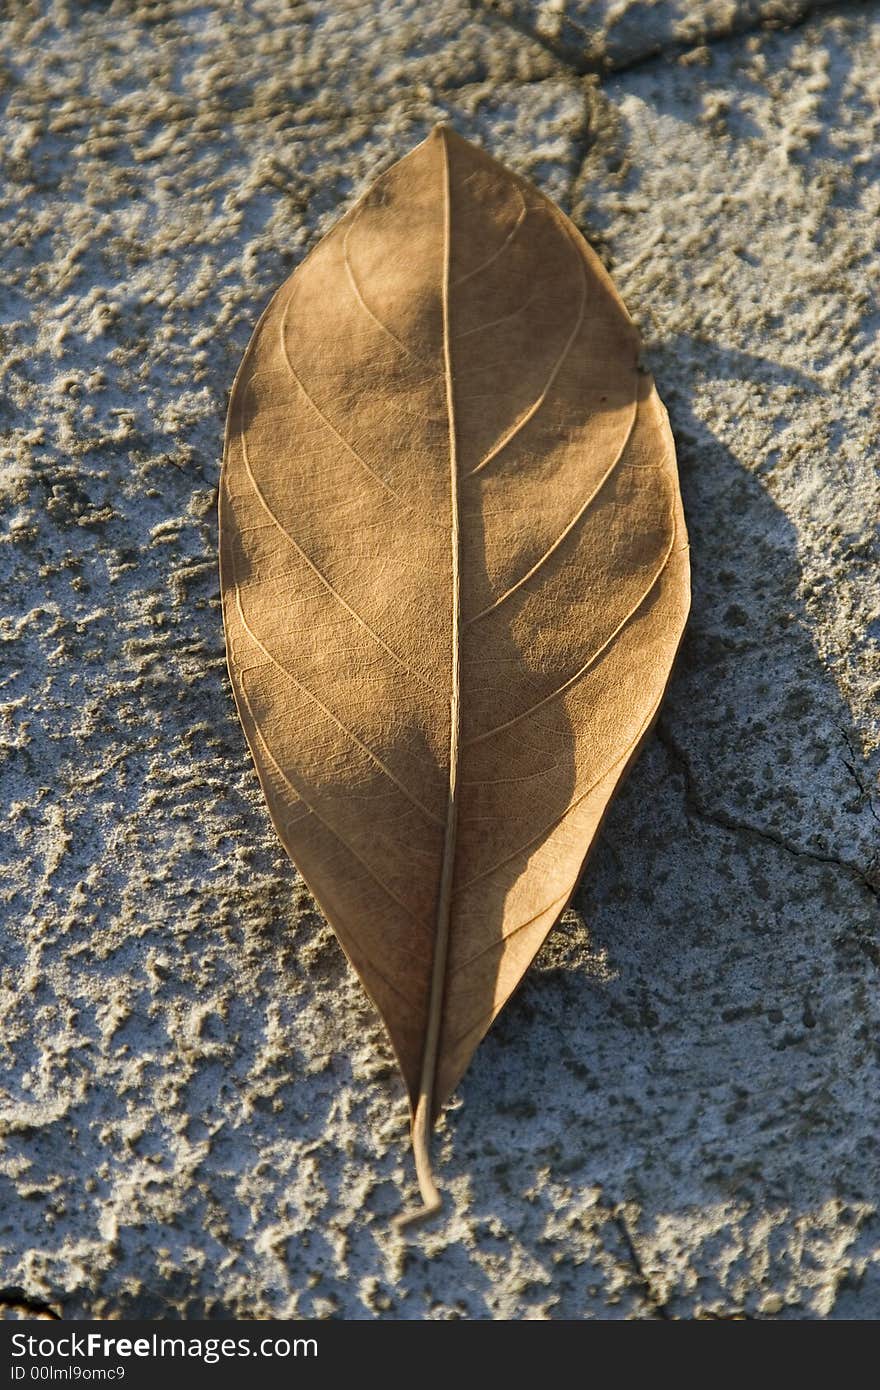 Close up photo of dry leaf on dry ground as symbol of a dry season